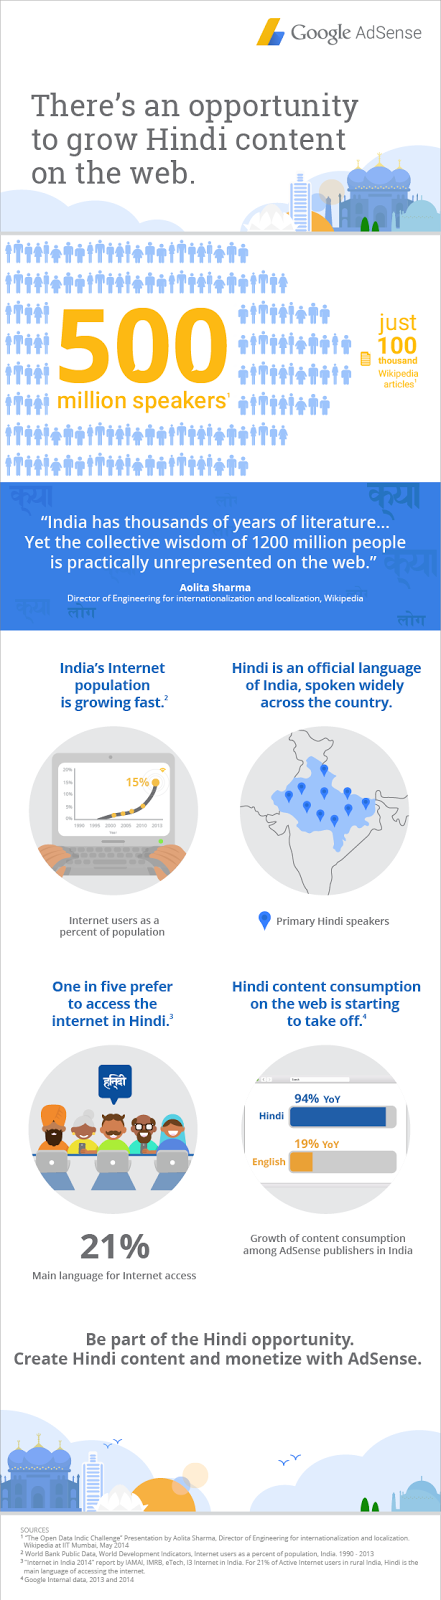 Hindi Content Is Key To Growing An Audience In India